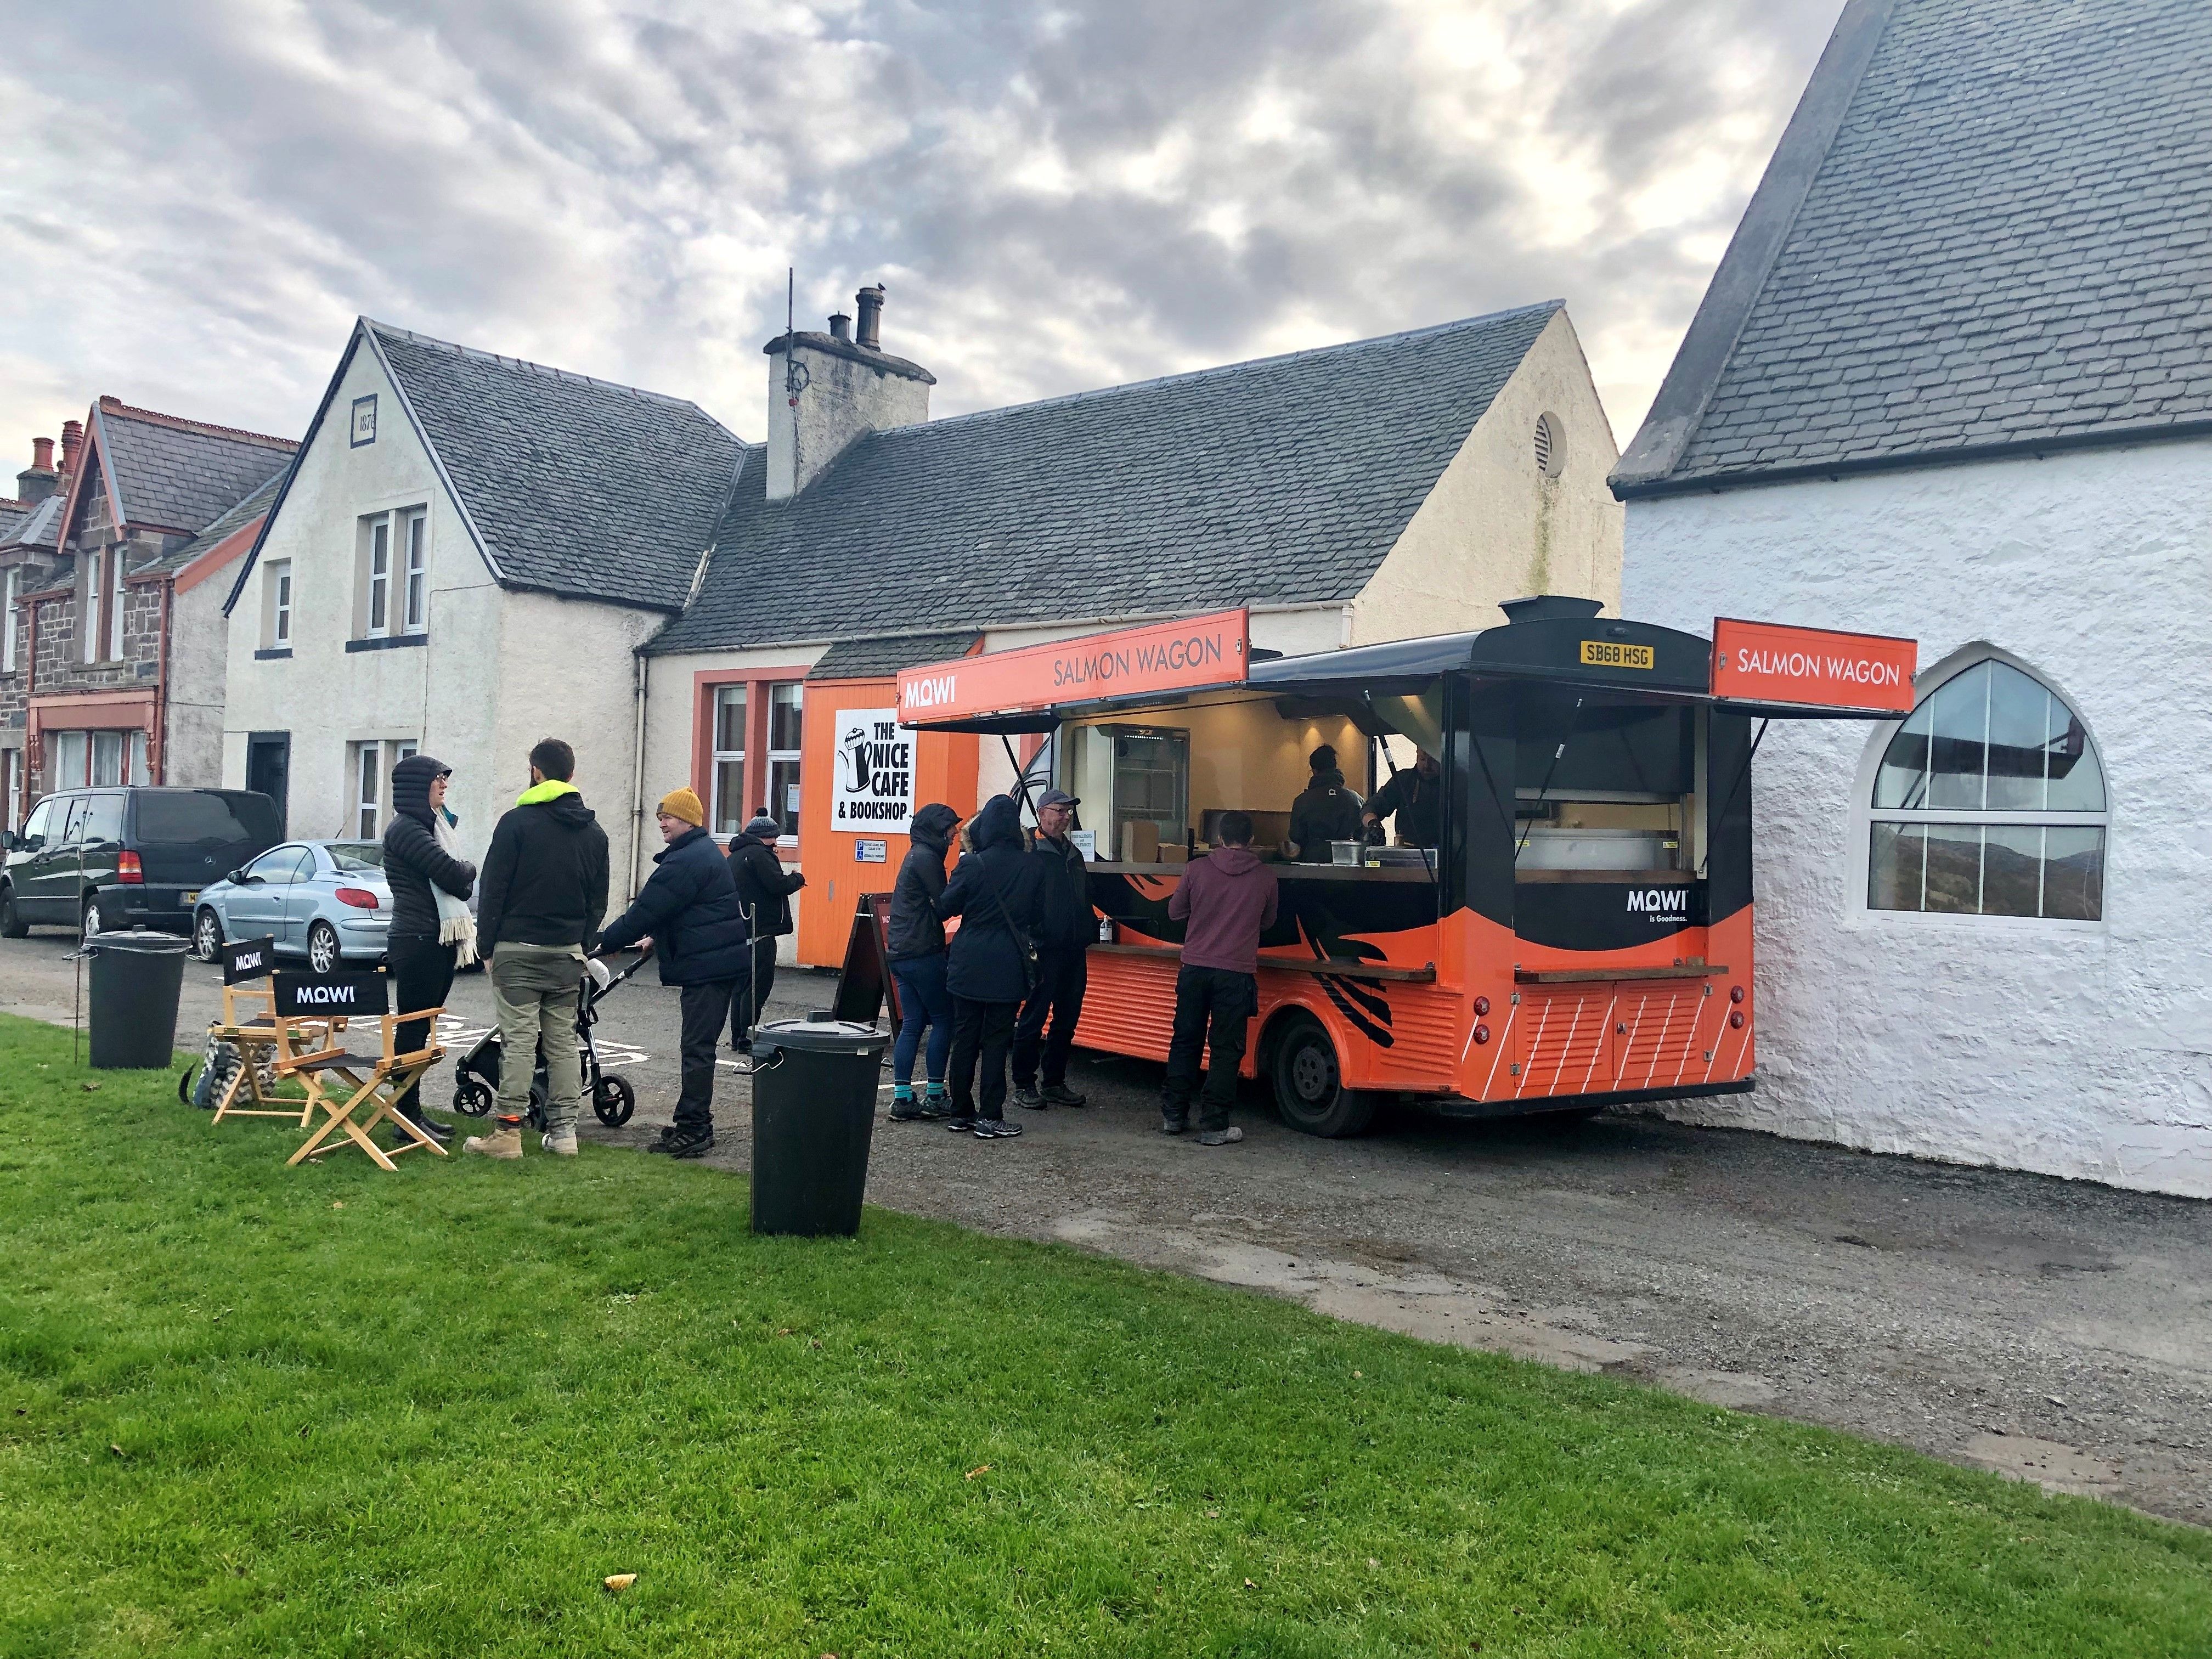 Mowi’s Salmon Wagon served barbeque salmon on a bun and Asian salmon noodle salad at the Kyleakin open day